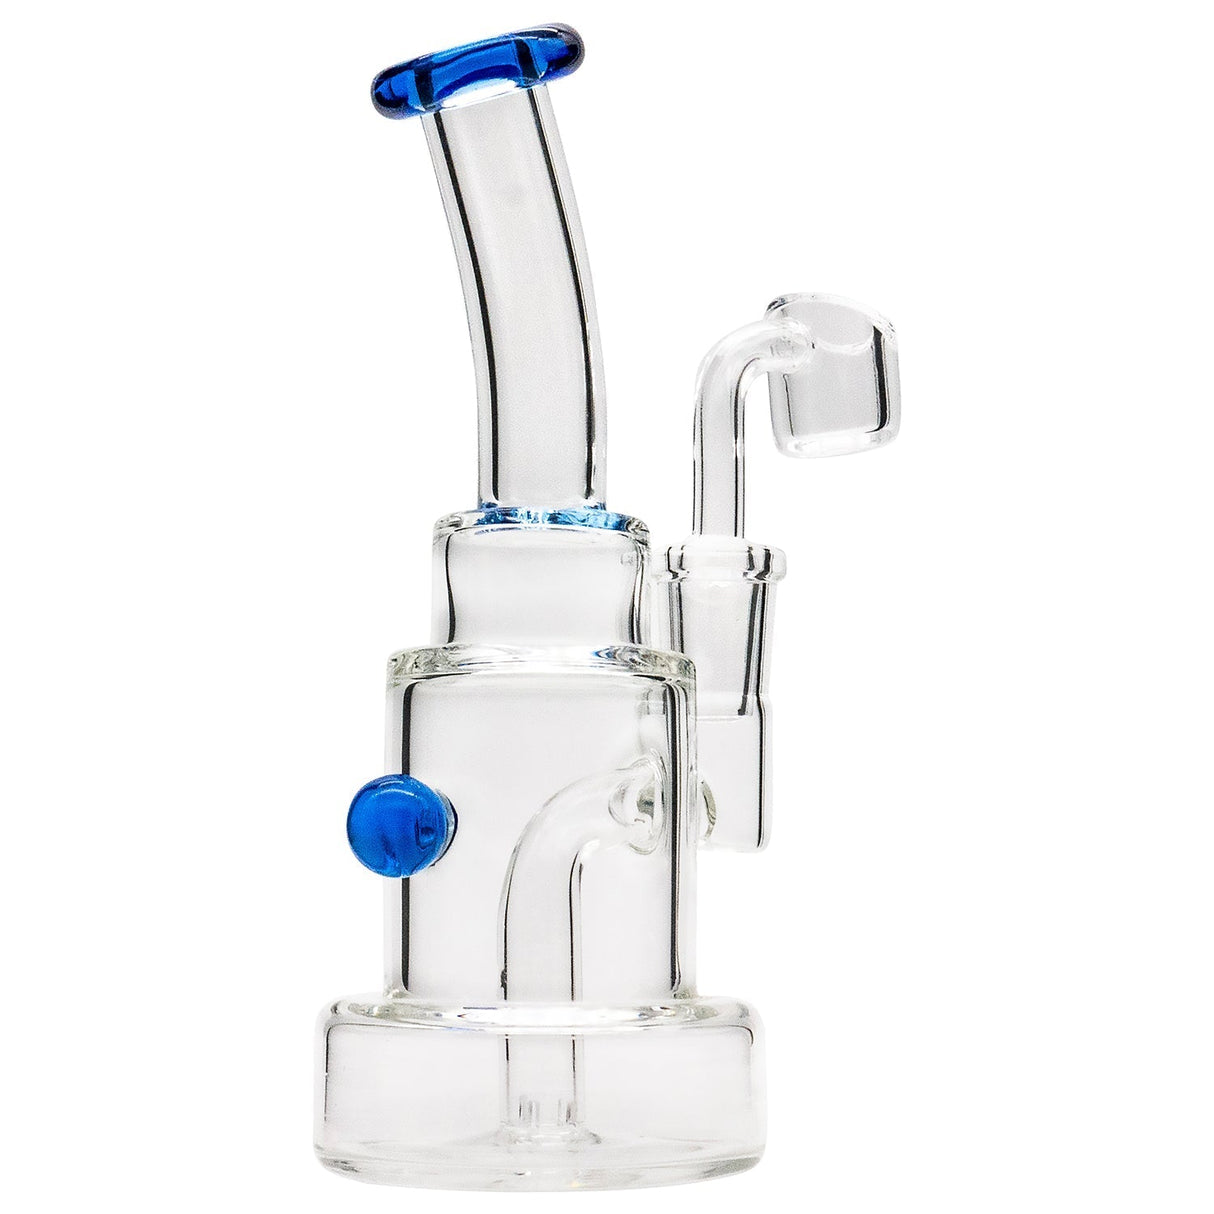 Glassic Stacked-Cake Dab Rig with blue accents and 90 degree banger hanger, front view on white background